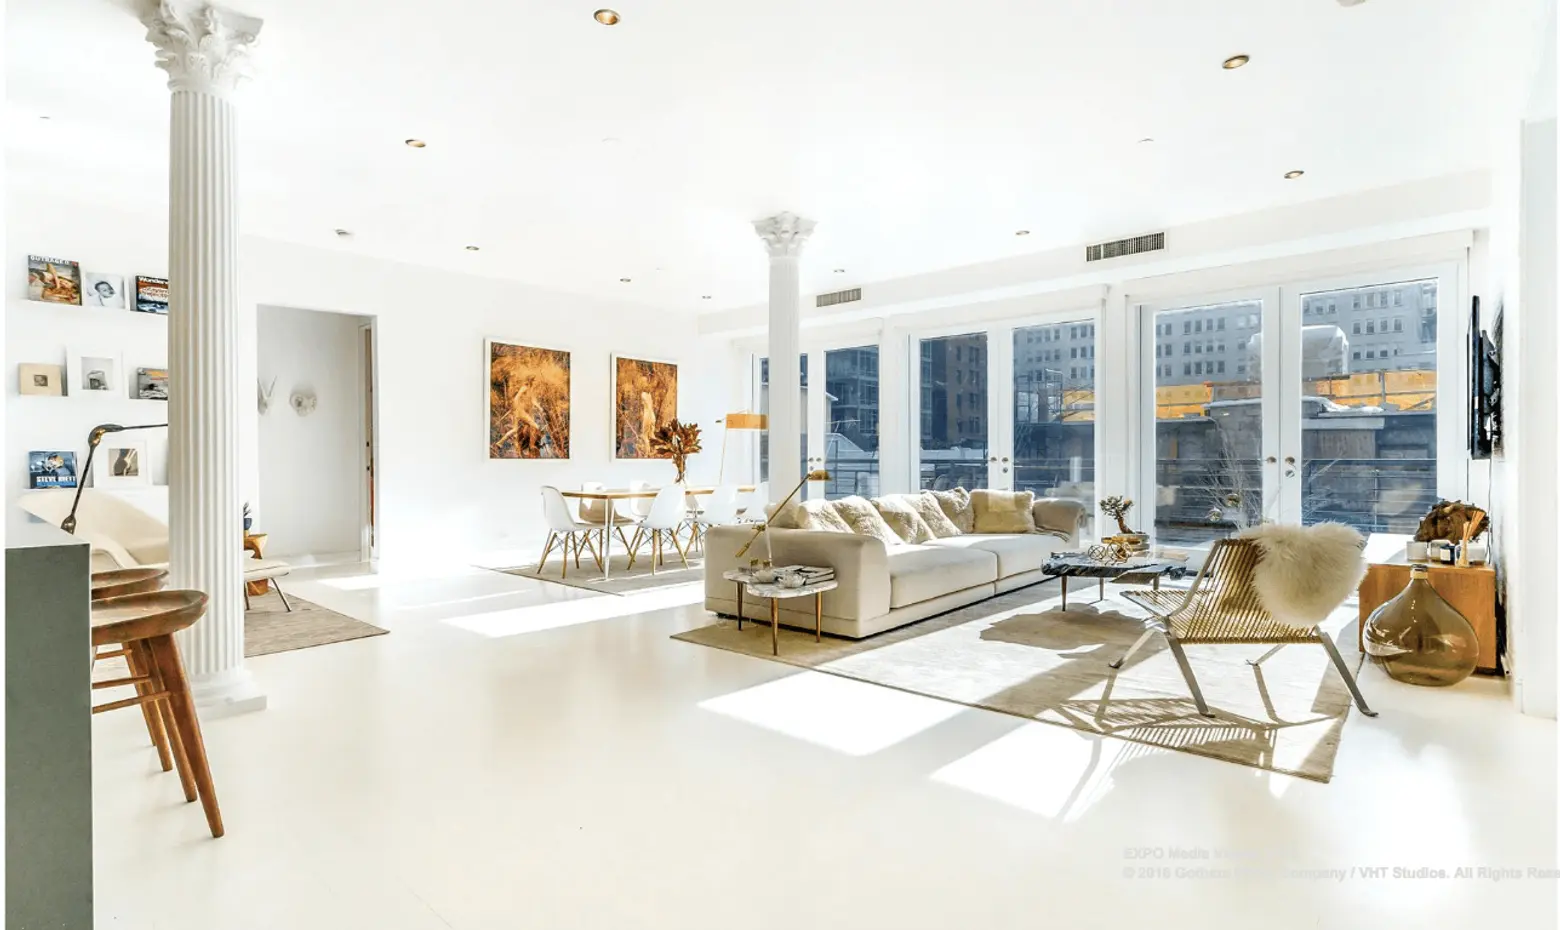 Half of Tribeca dream penthouse pair, whitewashed but still dreamy, hits the market for $4.9M